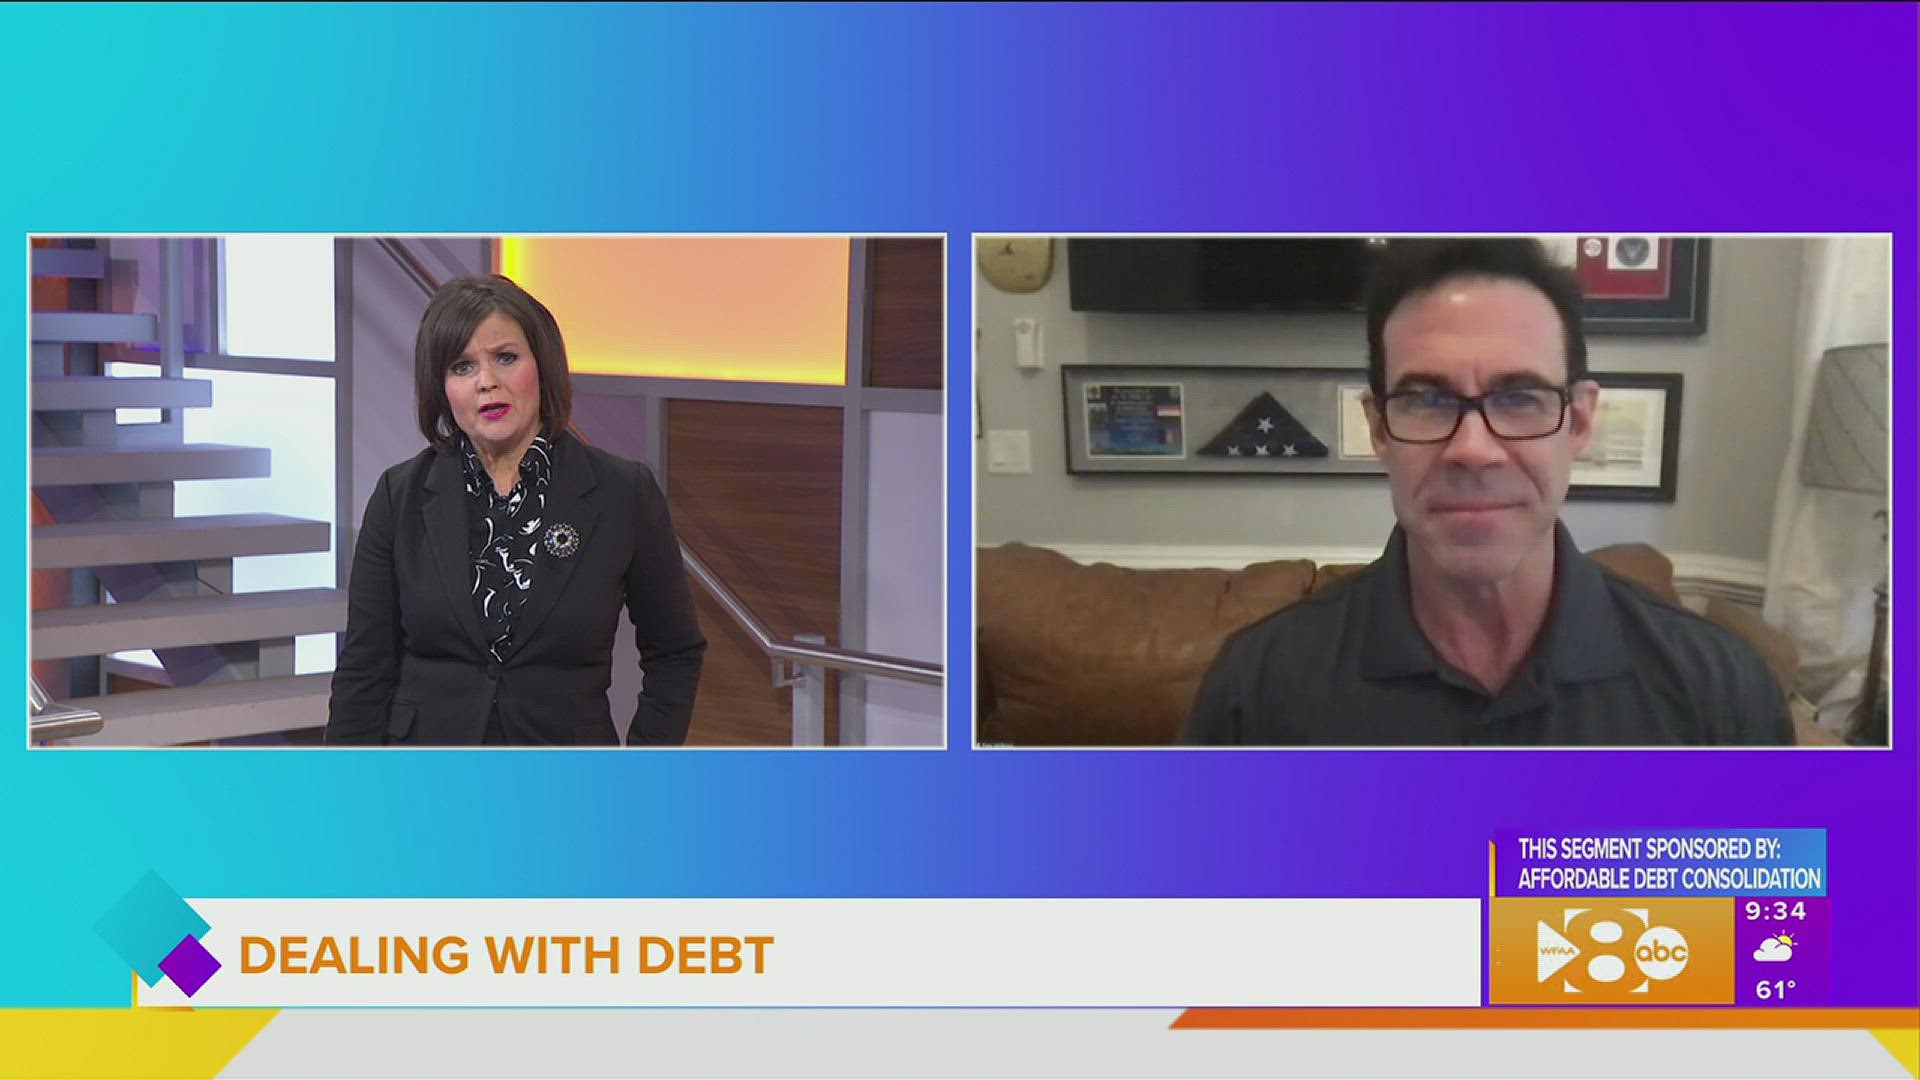 This segment is sponsored by Affordable Debt Consolidation. Call 800.816.1003 or go to affordabledebtconsolidation.com for more information.